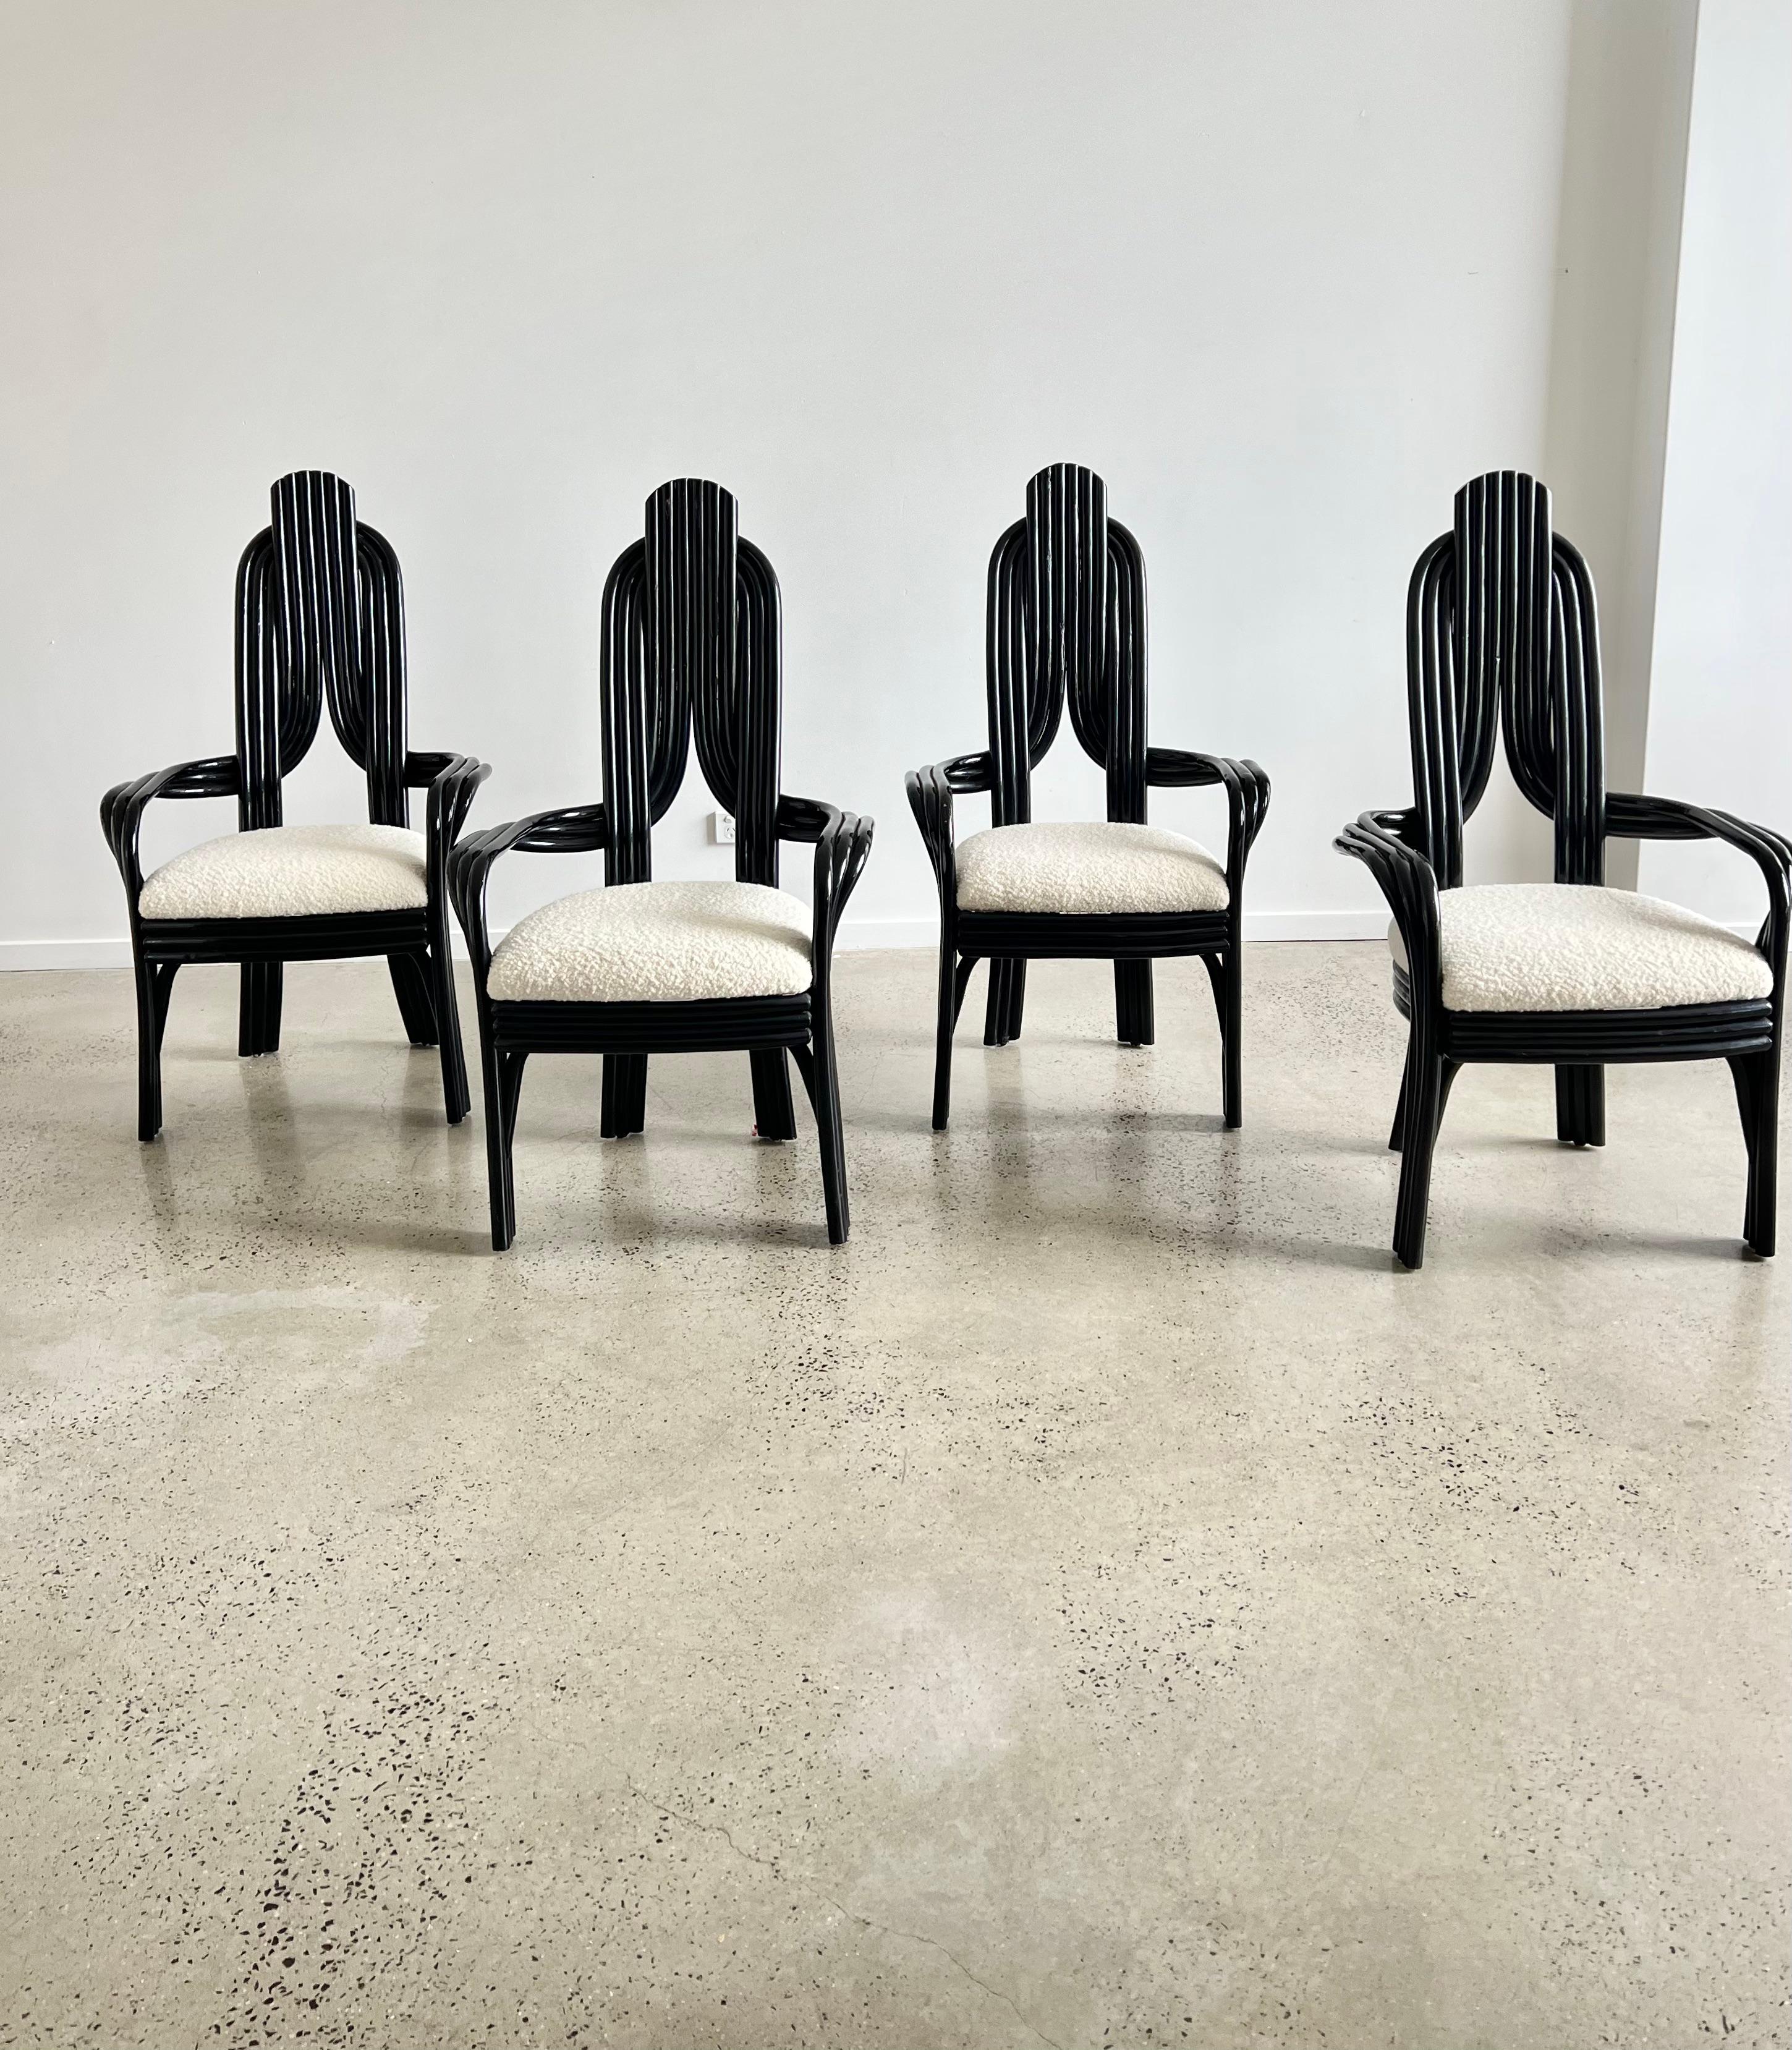 Unique set off four sculptural and confortable black lacquered Bamboo dining chairs, seats reupholstered with sheep skin.